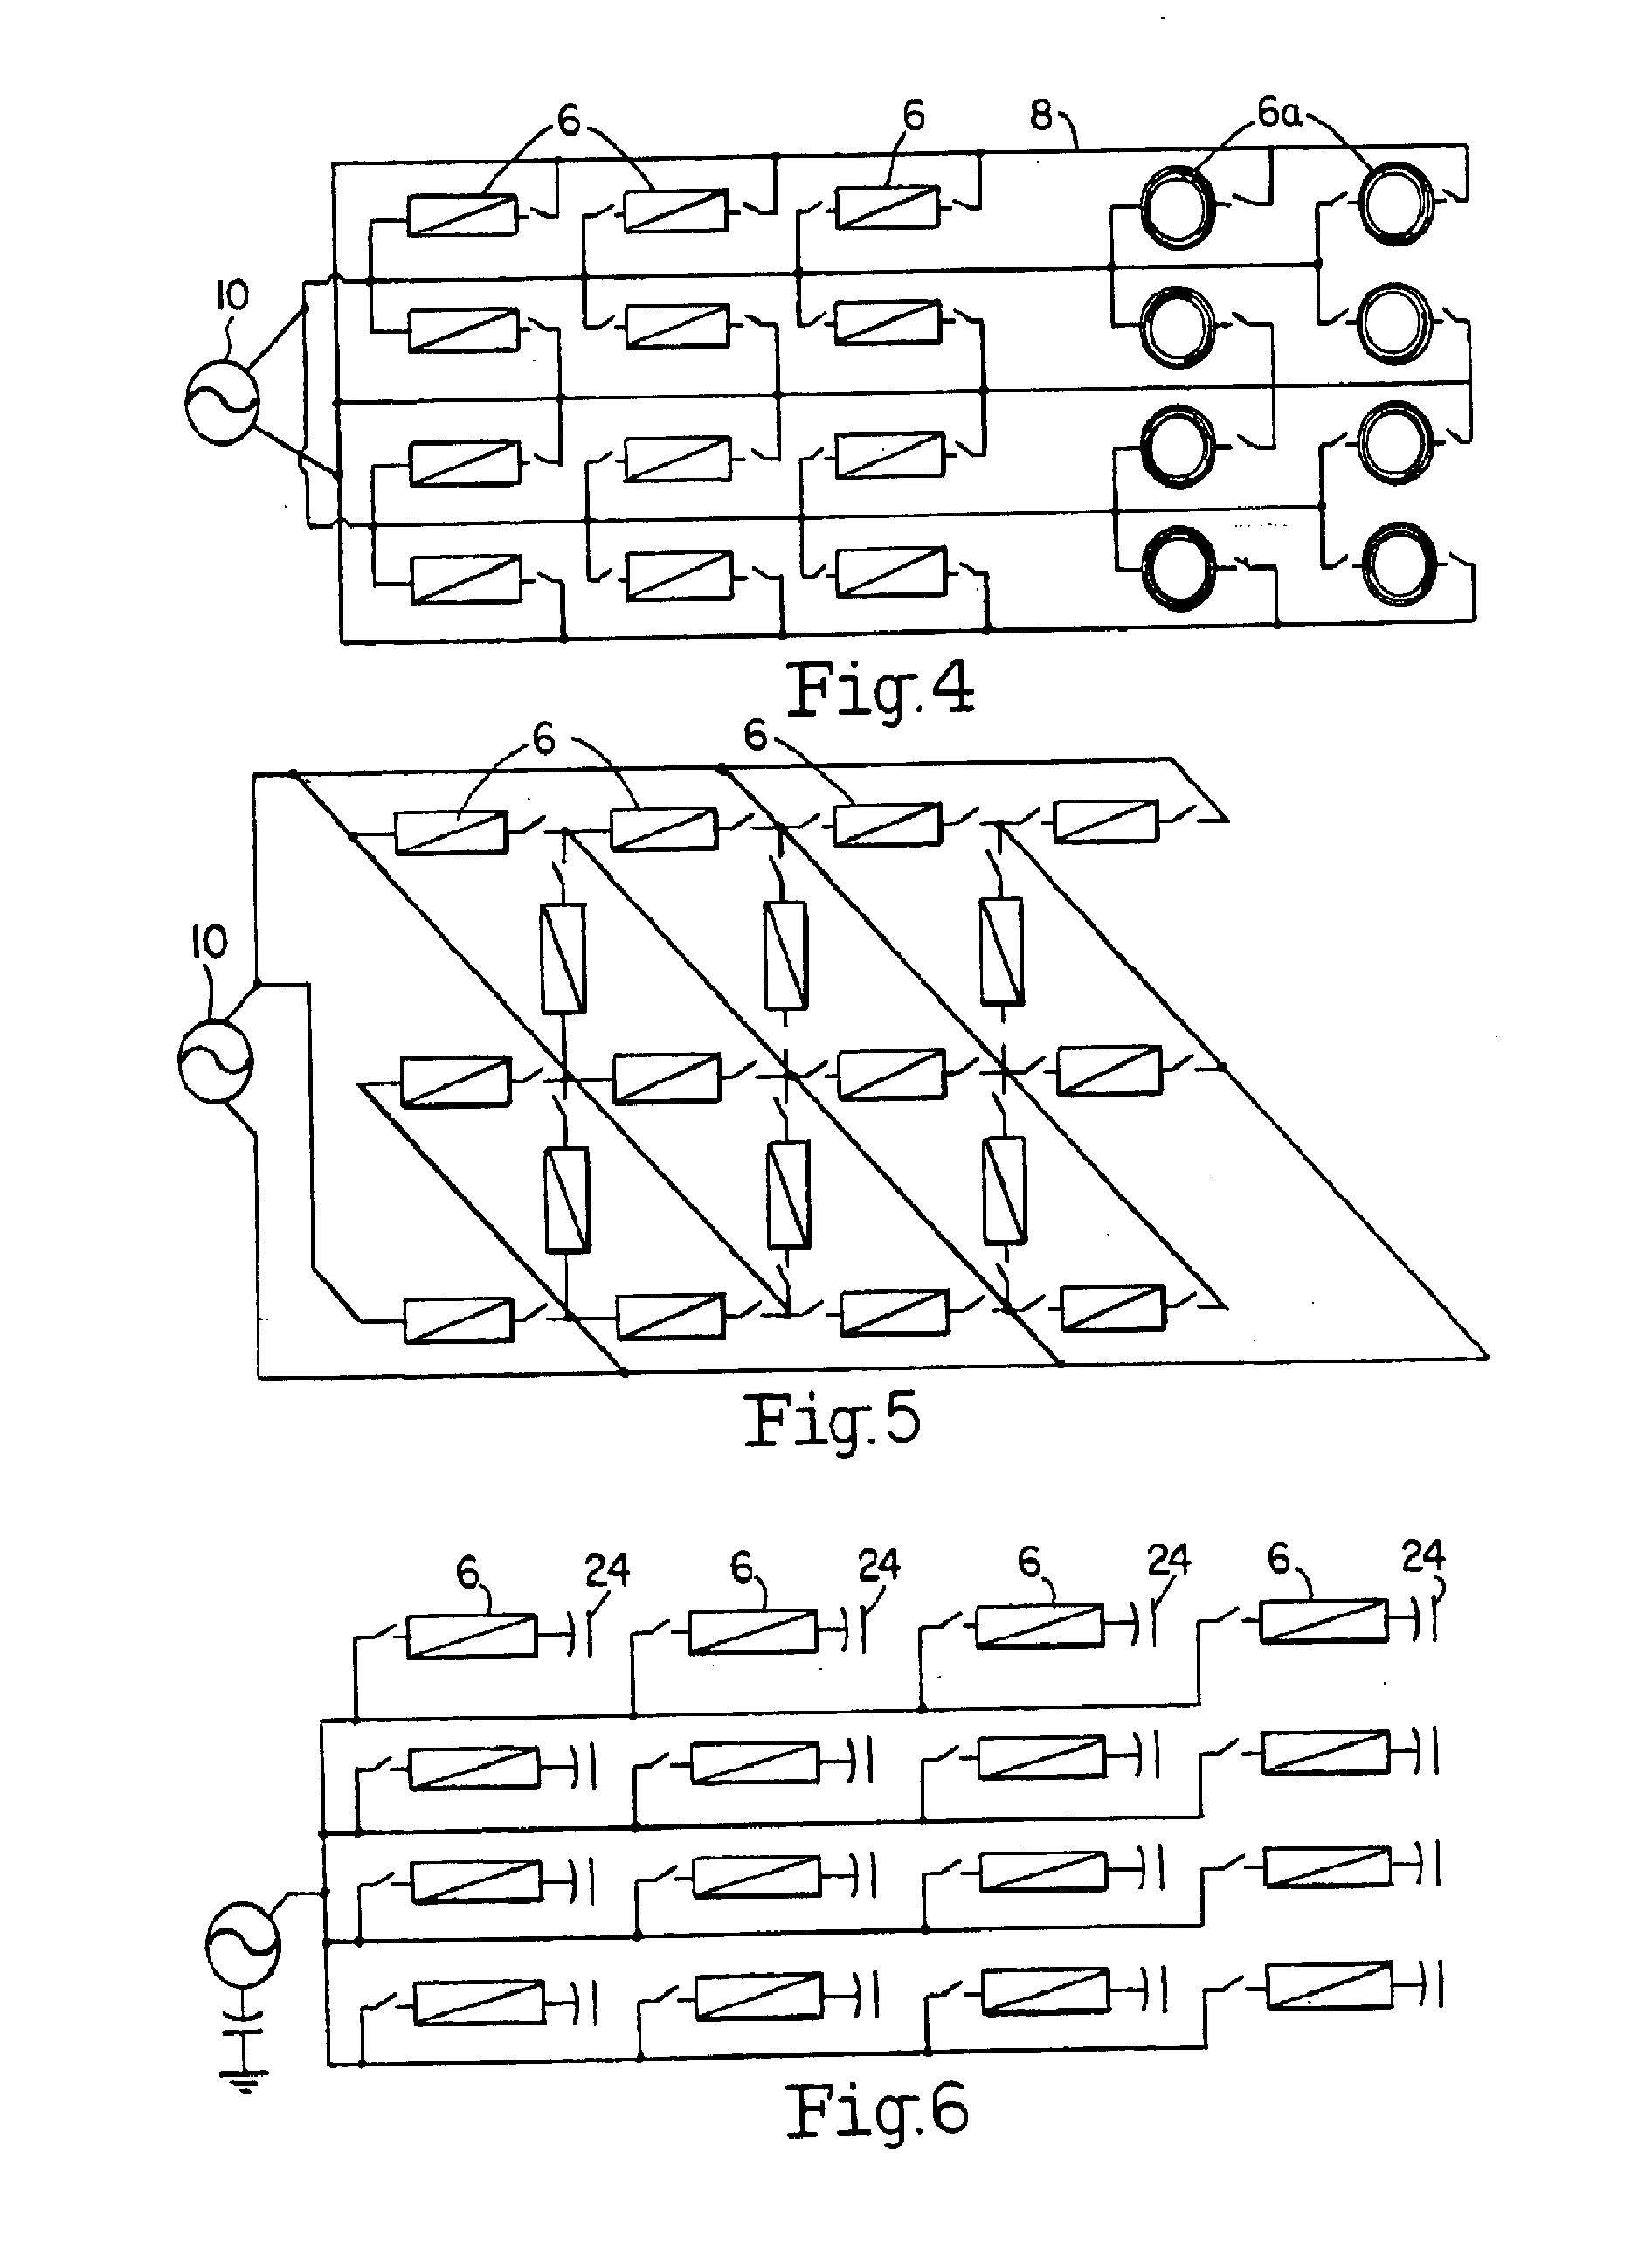 Alignment independent and self-aligning inductive power transfer system